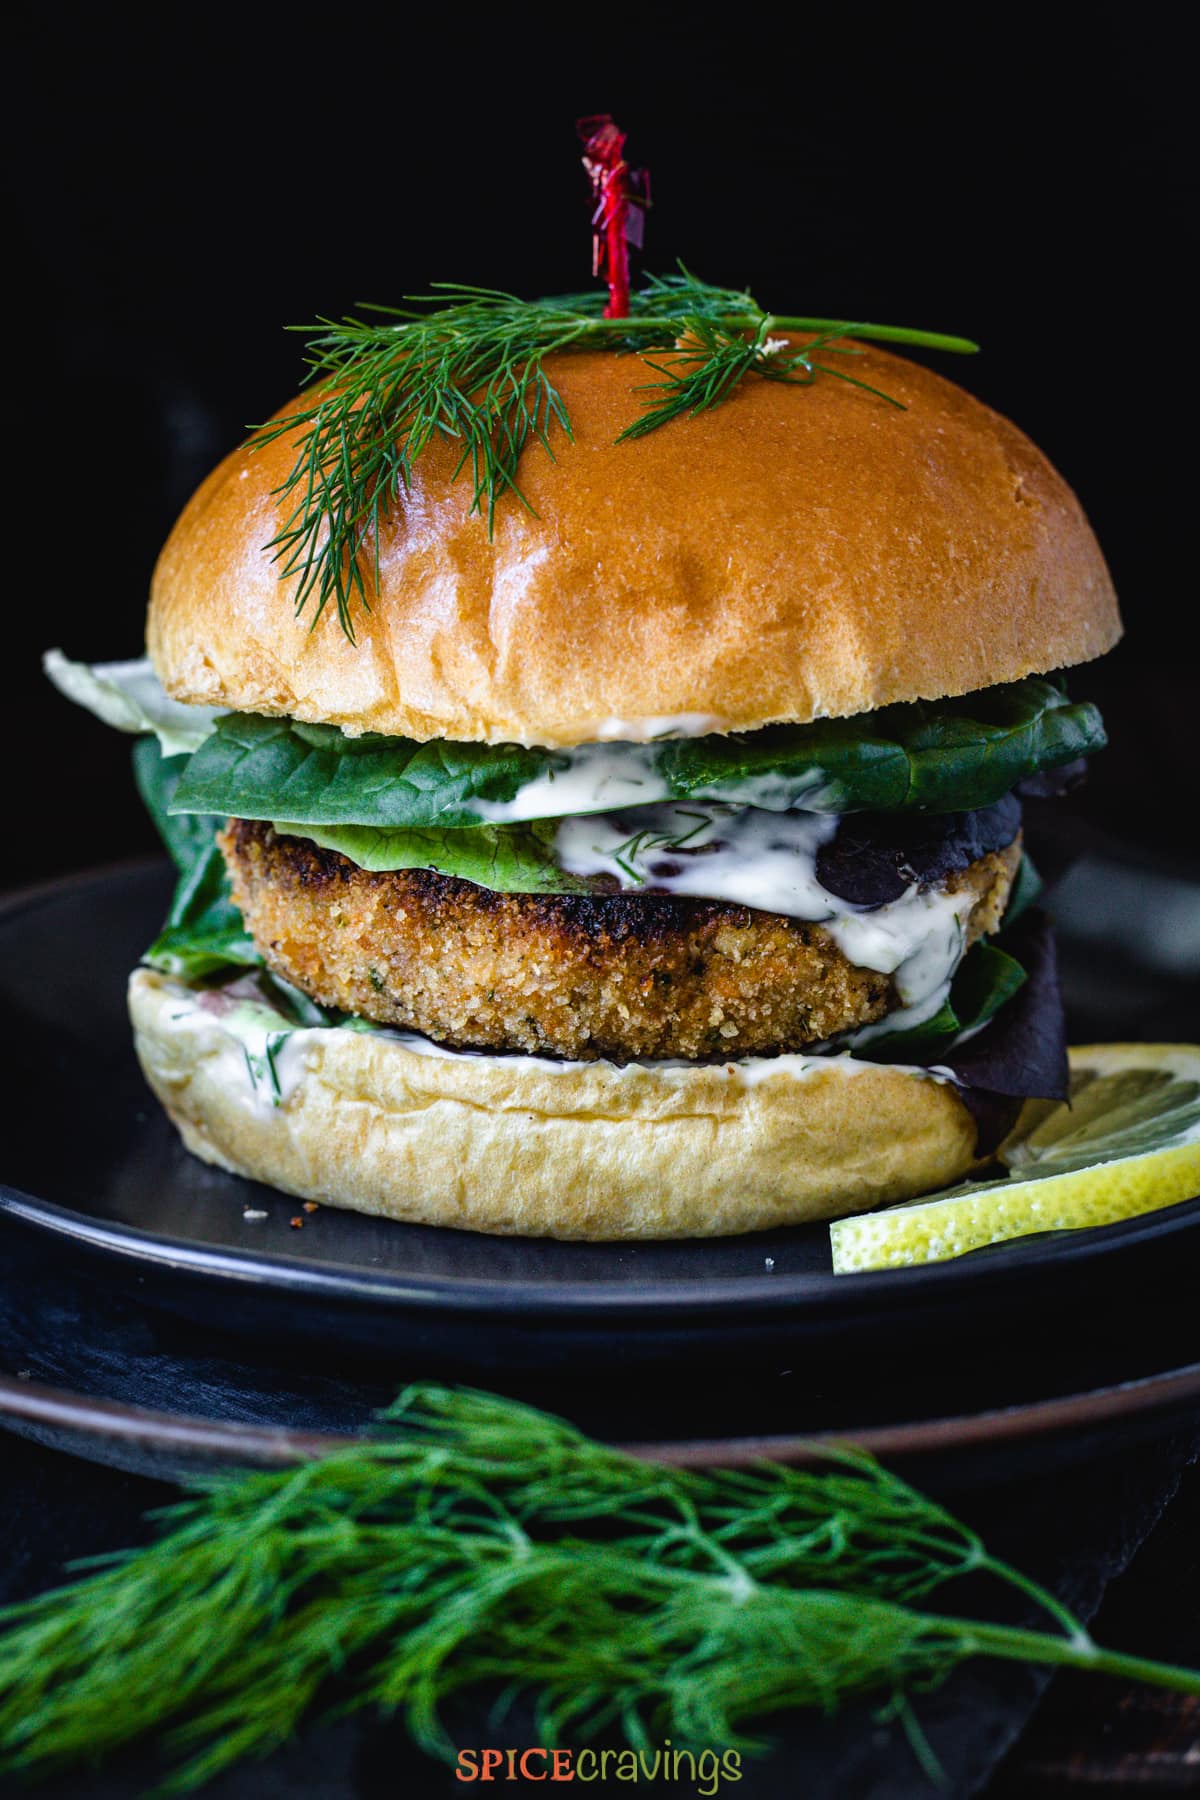 Salmon burger with spinach, dill and lemon caper sauce in the burger